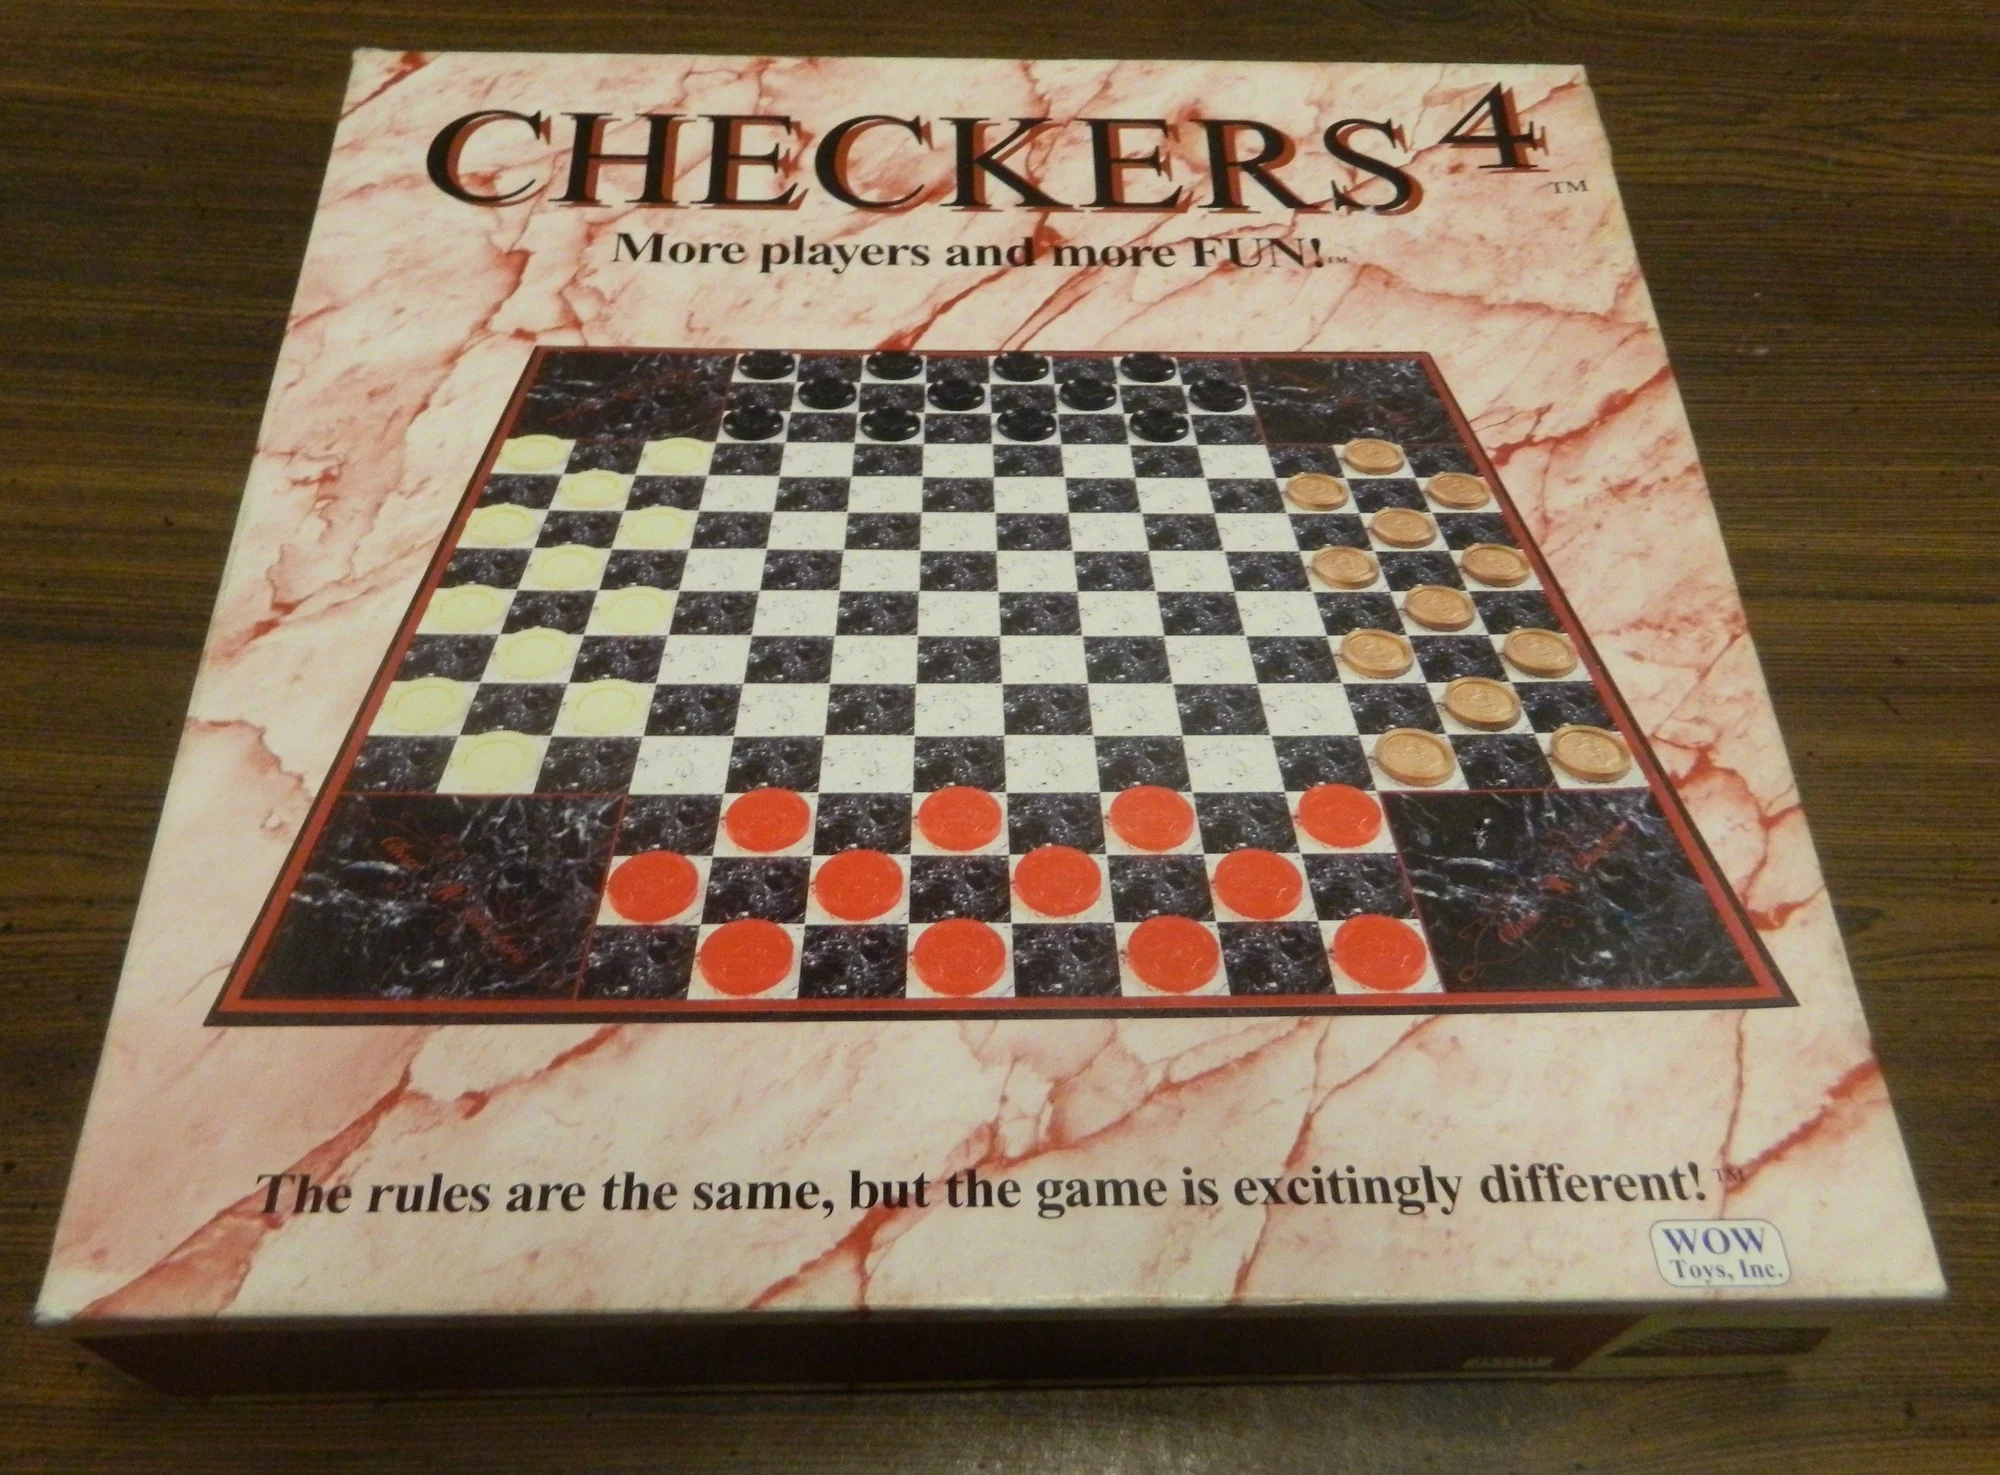 Box for Checkers4